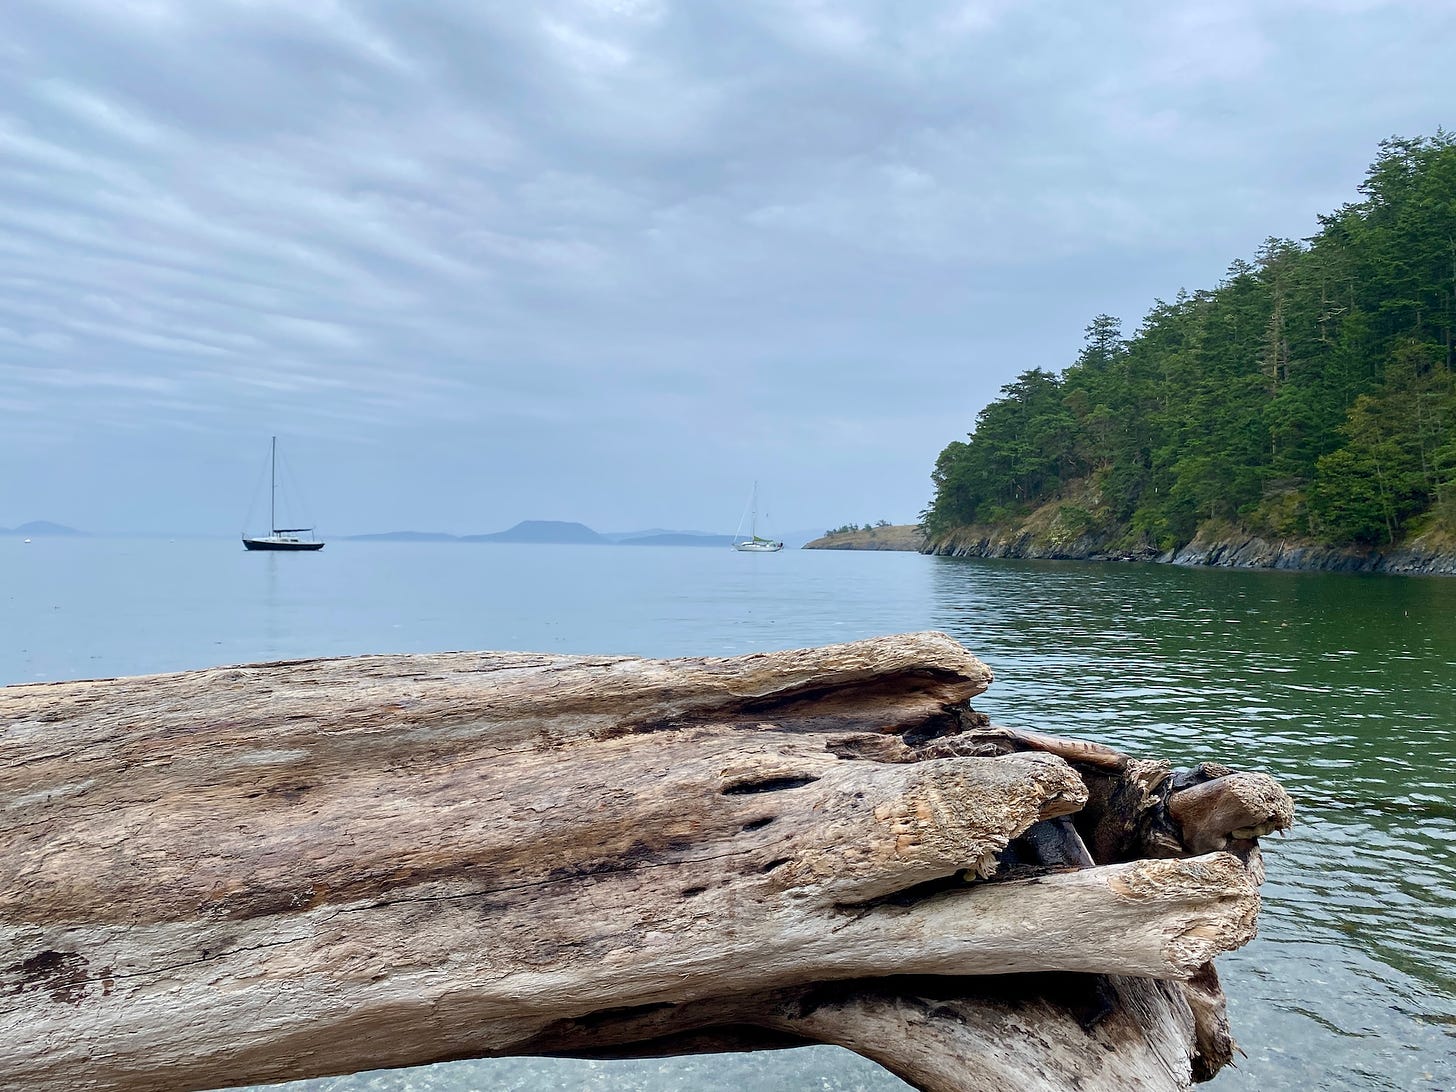 A photo. In the foreground is a large piece of driftwood, behind it a calm bay under overcast skies. Two sailboats are at anchor.